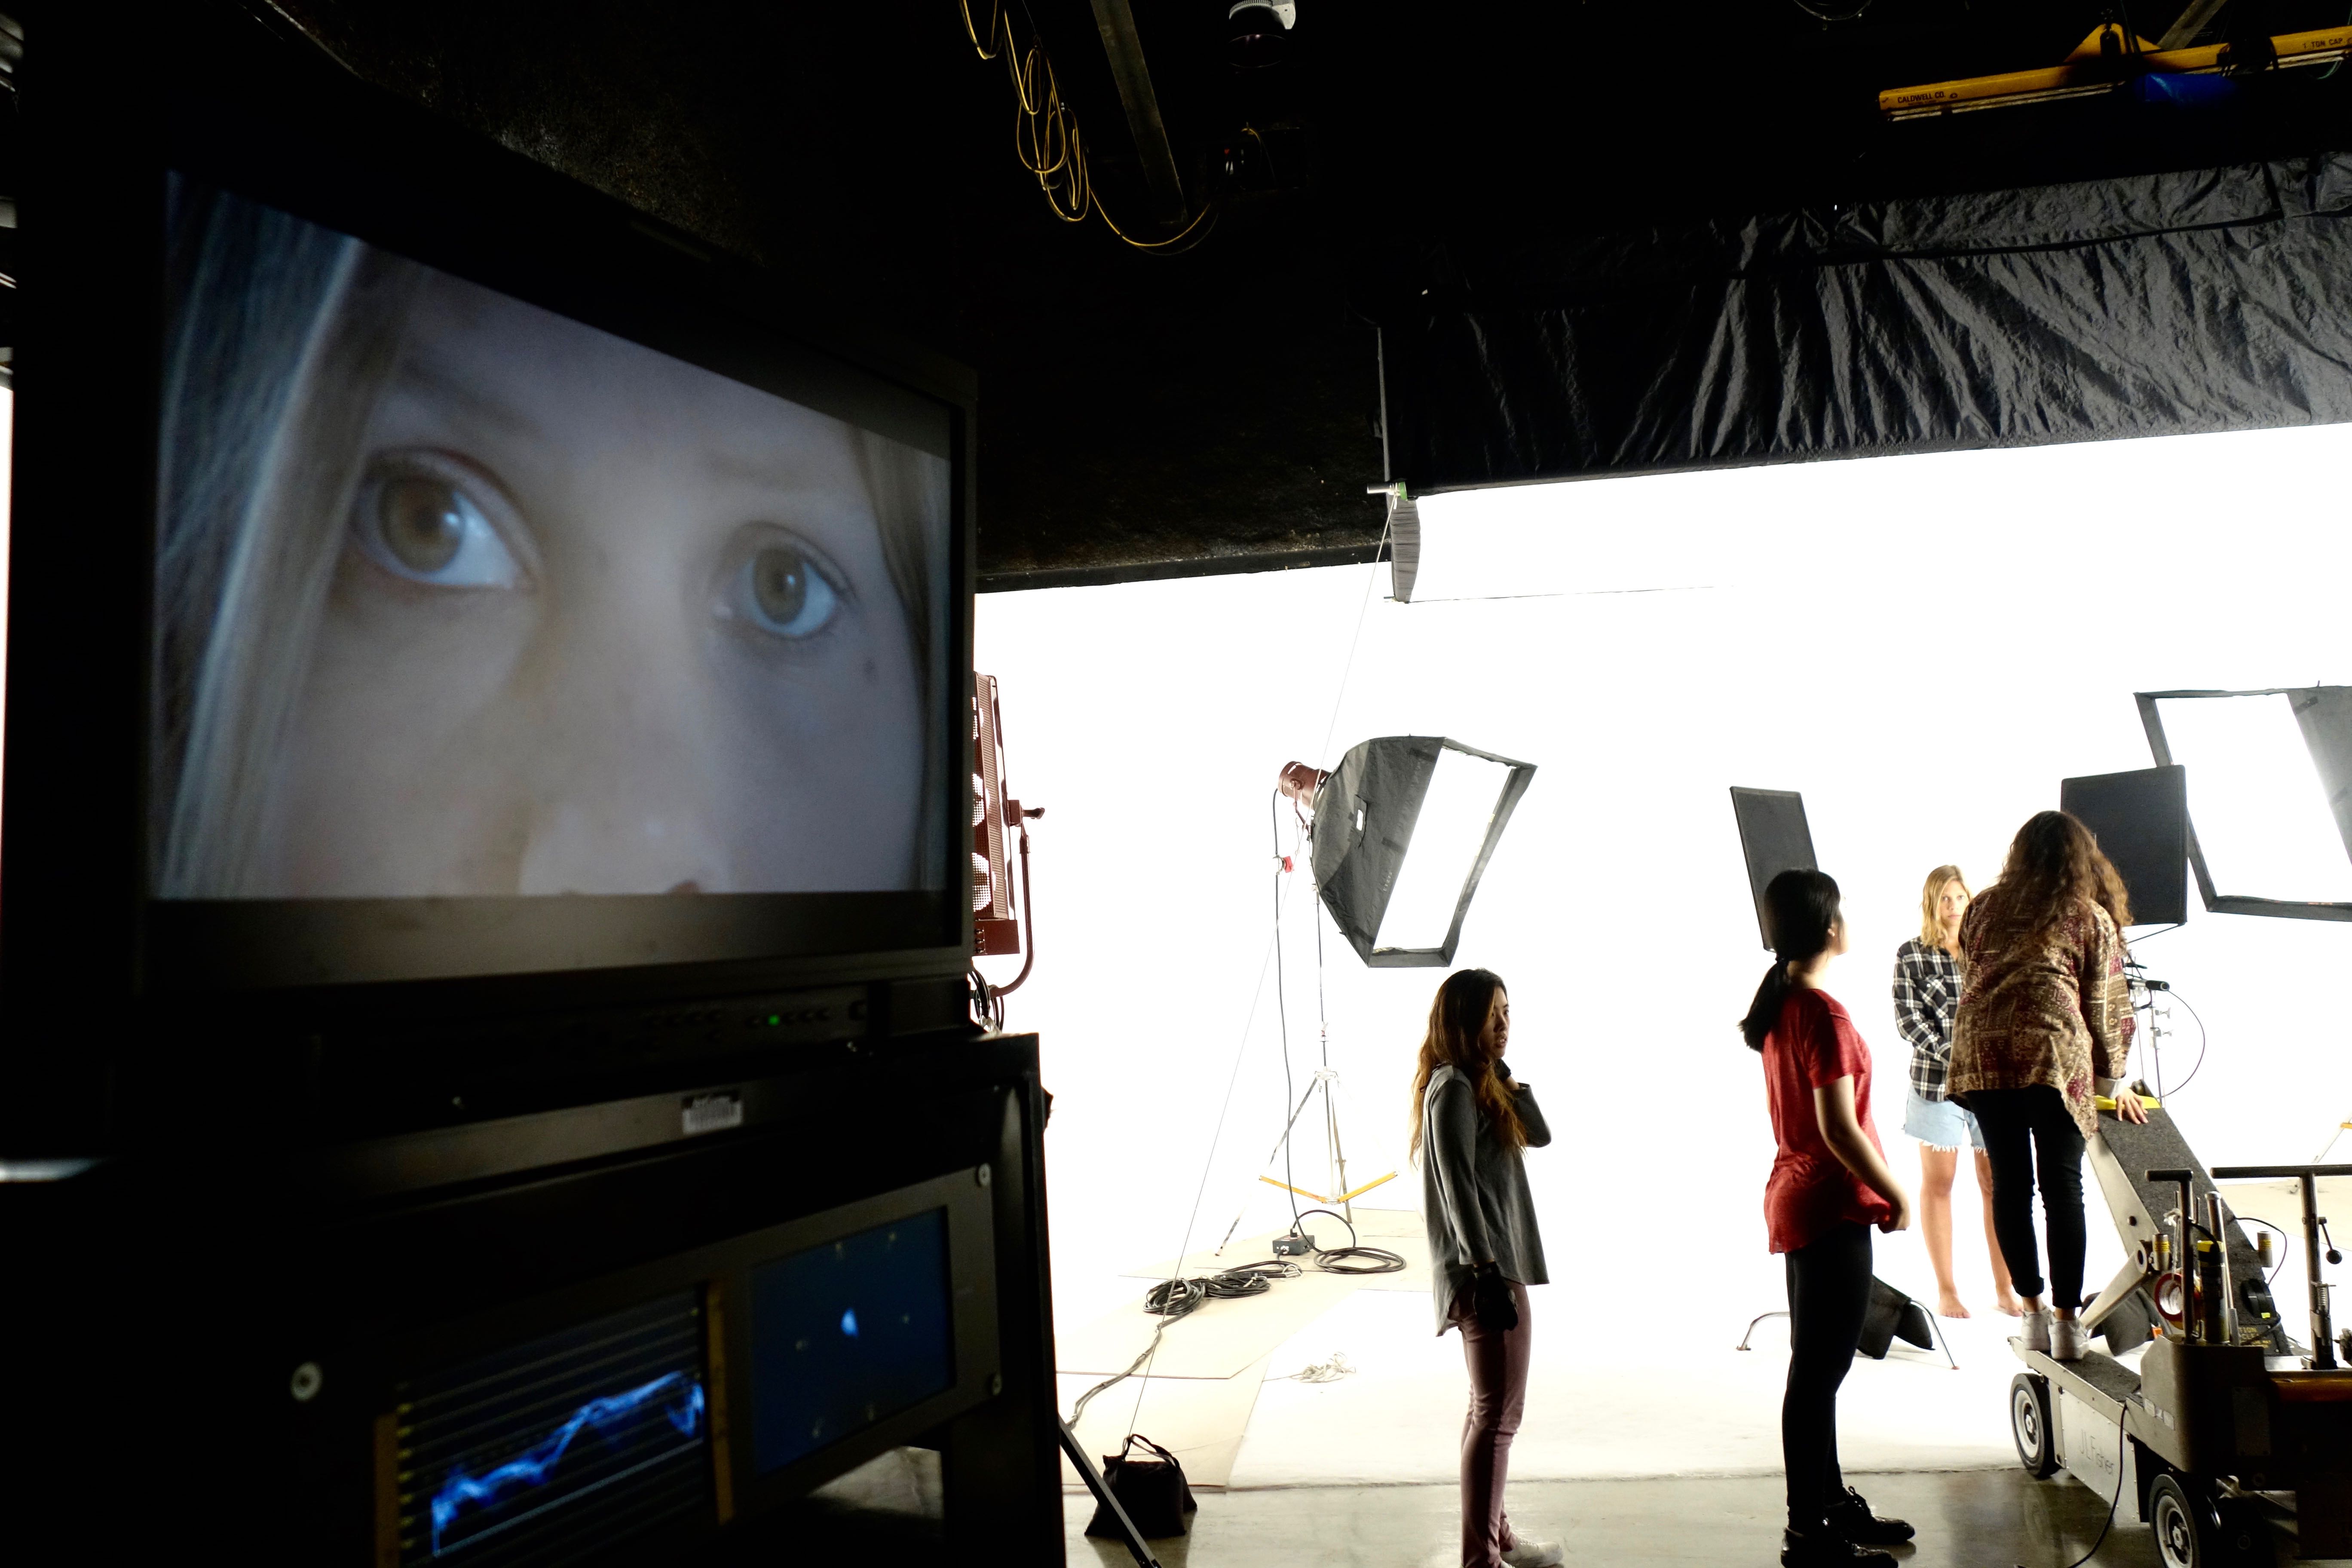 ArtCenter film students on set shooting a project with a large screen close up of a young woman